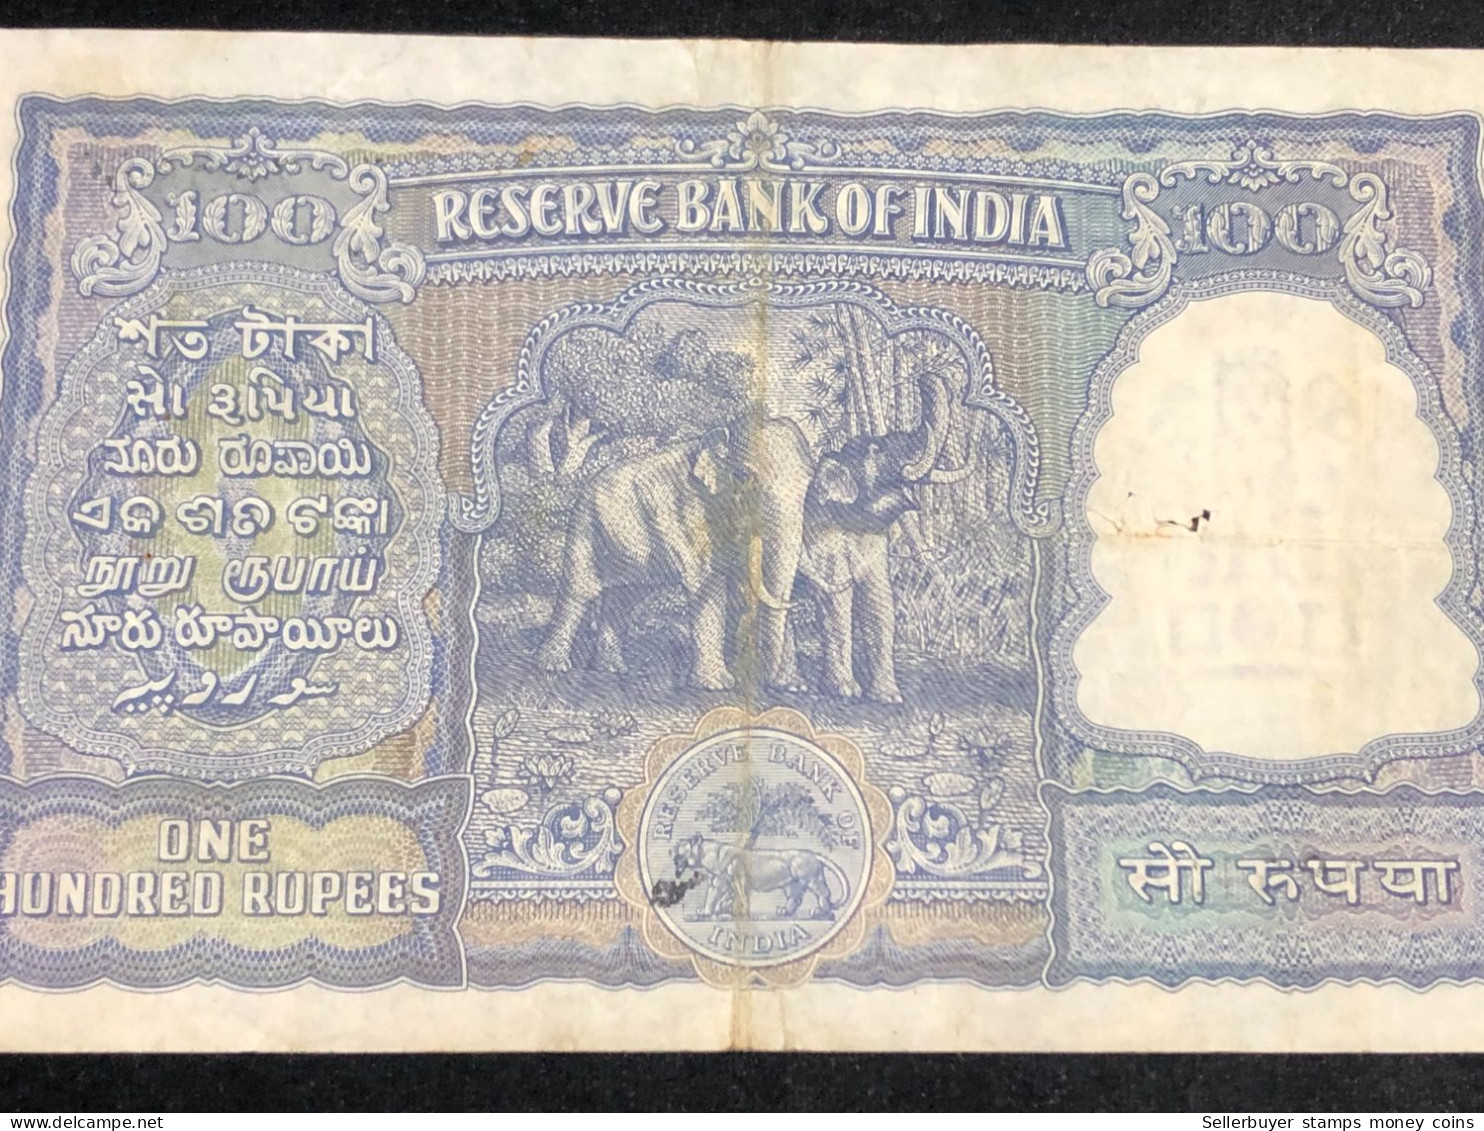 INDIA 100 RUPEES P-43  1957 TIGER ELEPHANT DAM MONEY BILL Rhas pinhole ARE BANK NOTE Black numbers above and below 1 pcs